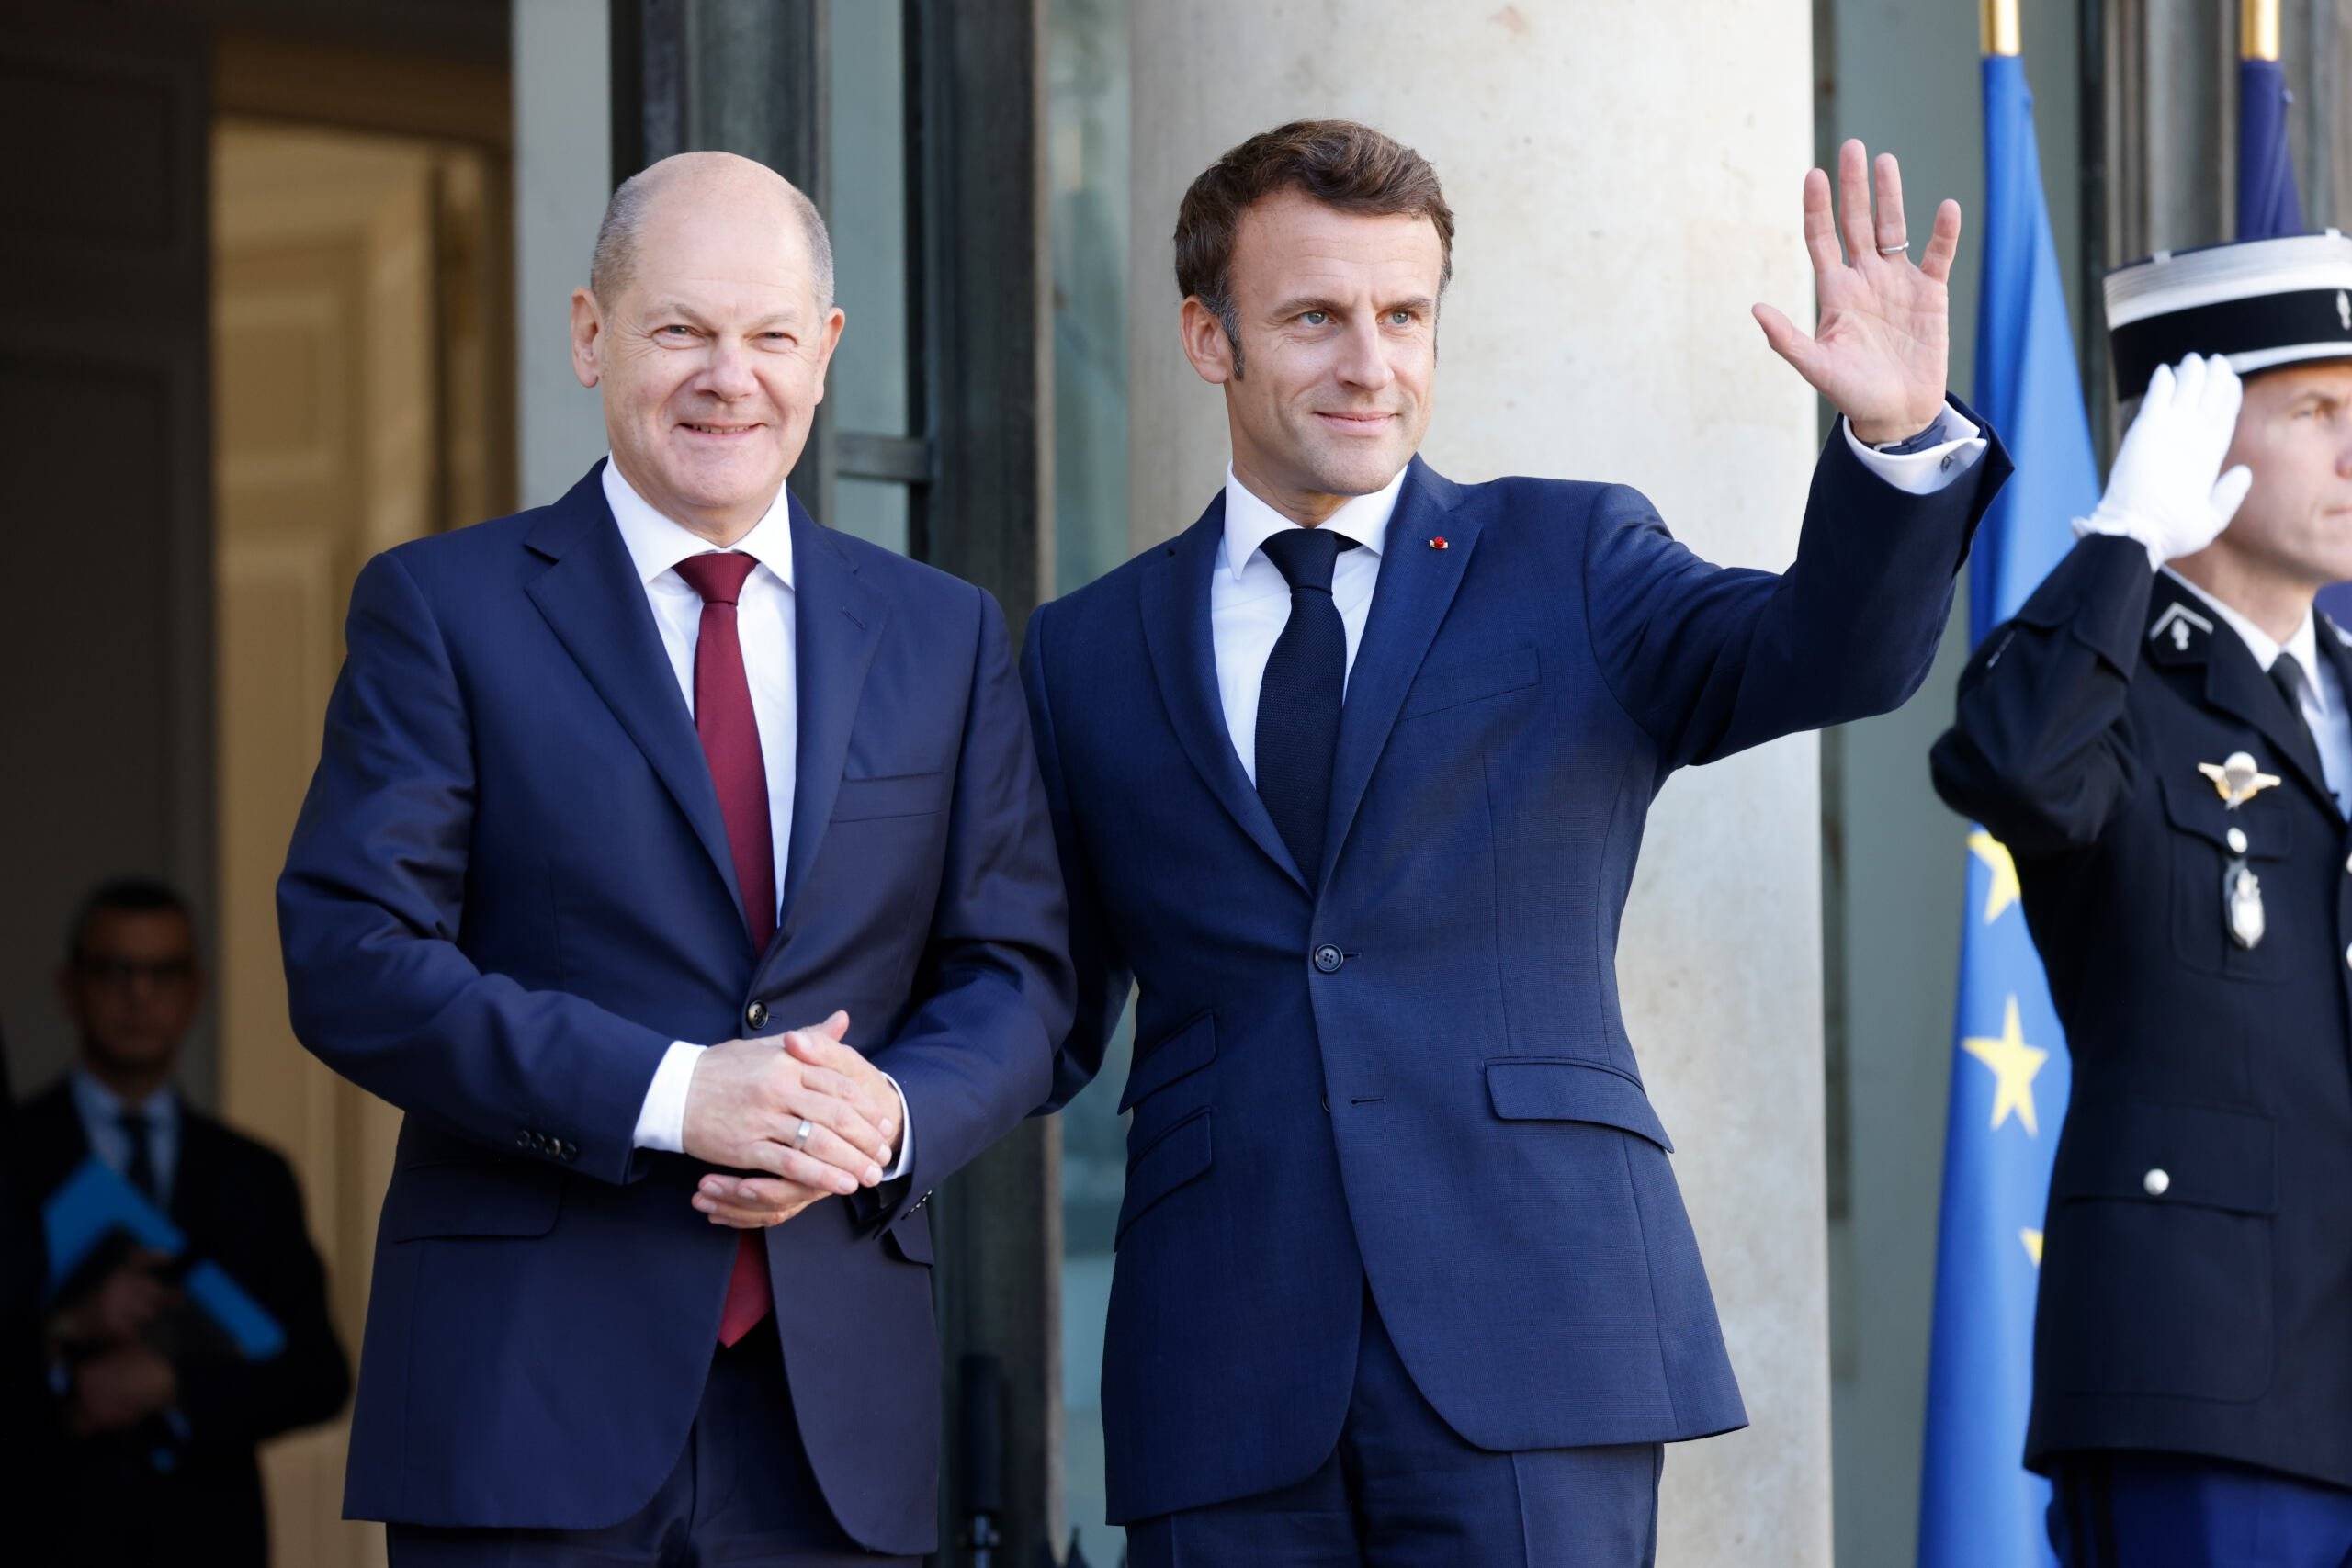 France's President Emmanuel Macron (R) waves as he welcomes German Chancellor Olaf Scholz upon his arrival for a lunch at the presidential Elysee Palace in Paris on October 26, 2022. - The two leaders aim to "strengthen Franco-German cooperation" and respond to common challenges in a "united and supportive way", to revive the Franco-German tandem, plagued by a series of disputes, from energy to defense, against the backdrop of the war in Ukraine. (Photo by Ludovic MARIN / AFP)